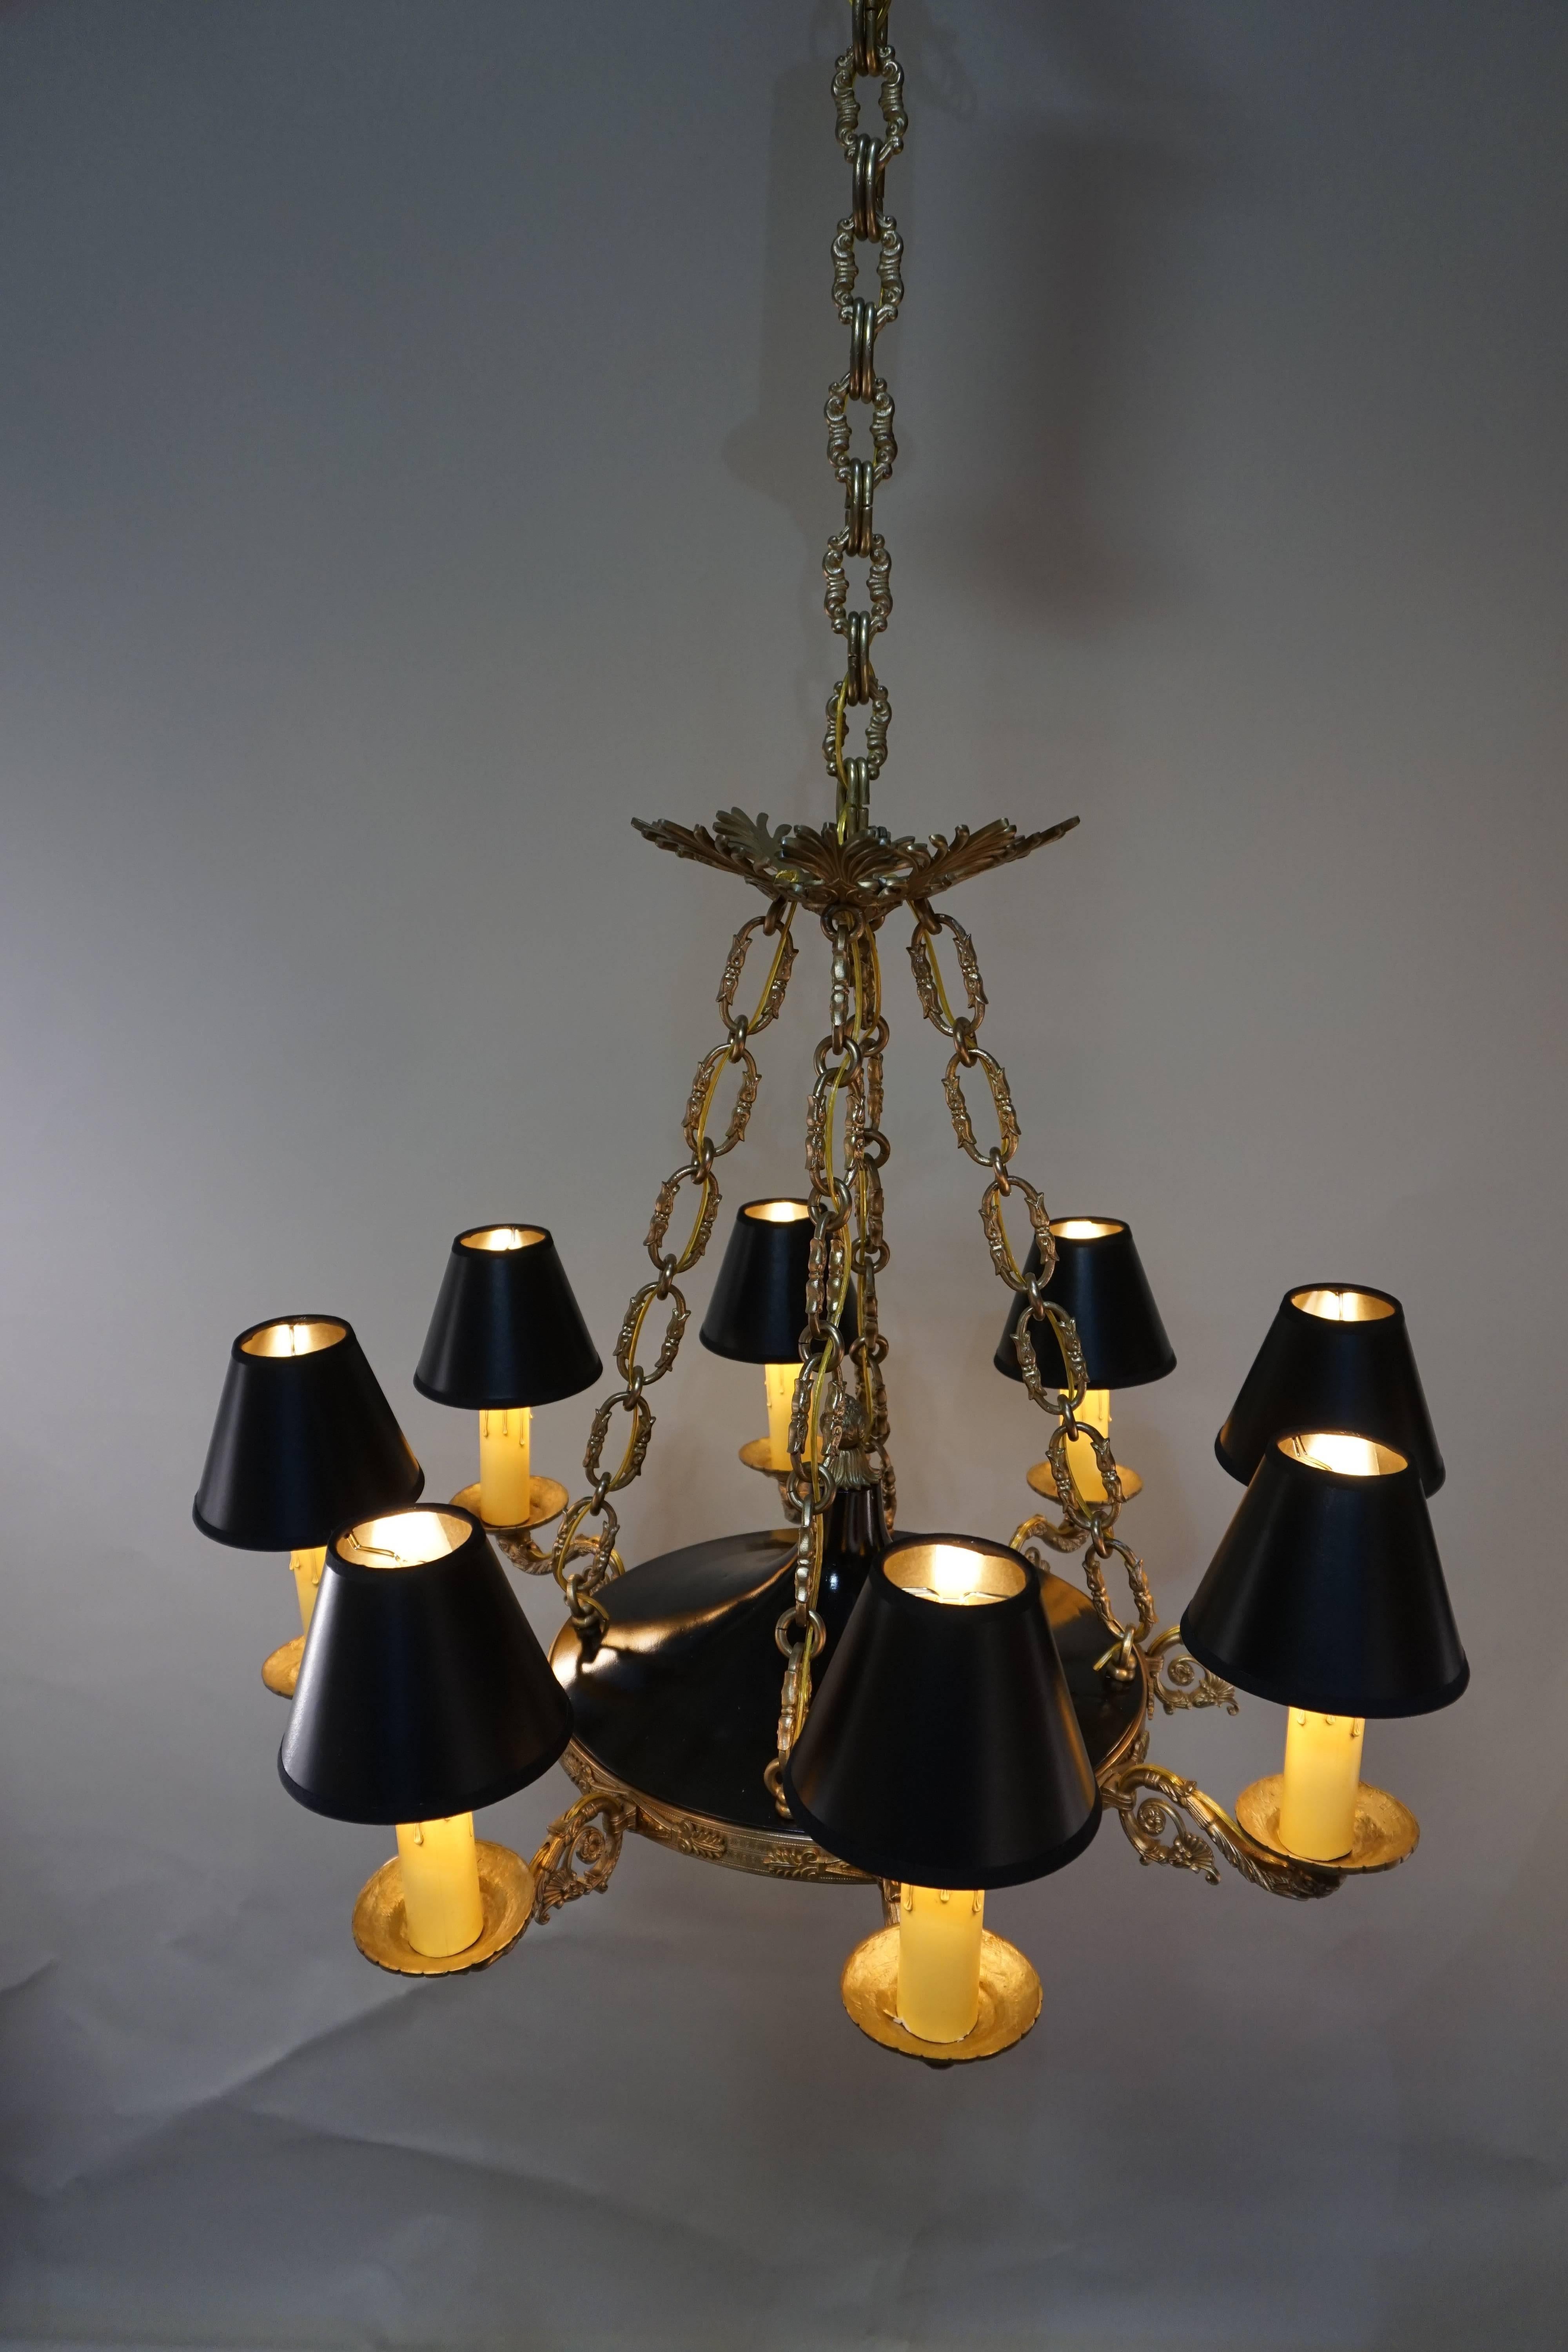 Made in France during 1930s. A truly beautiful eight-light French Empire bronze chandelier.
This chandelier can be fully installed with 28